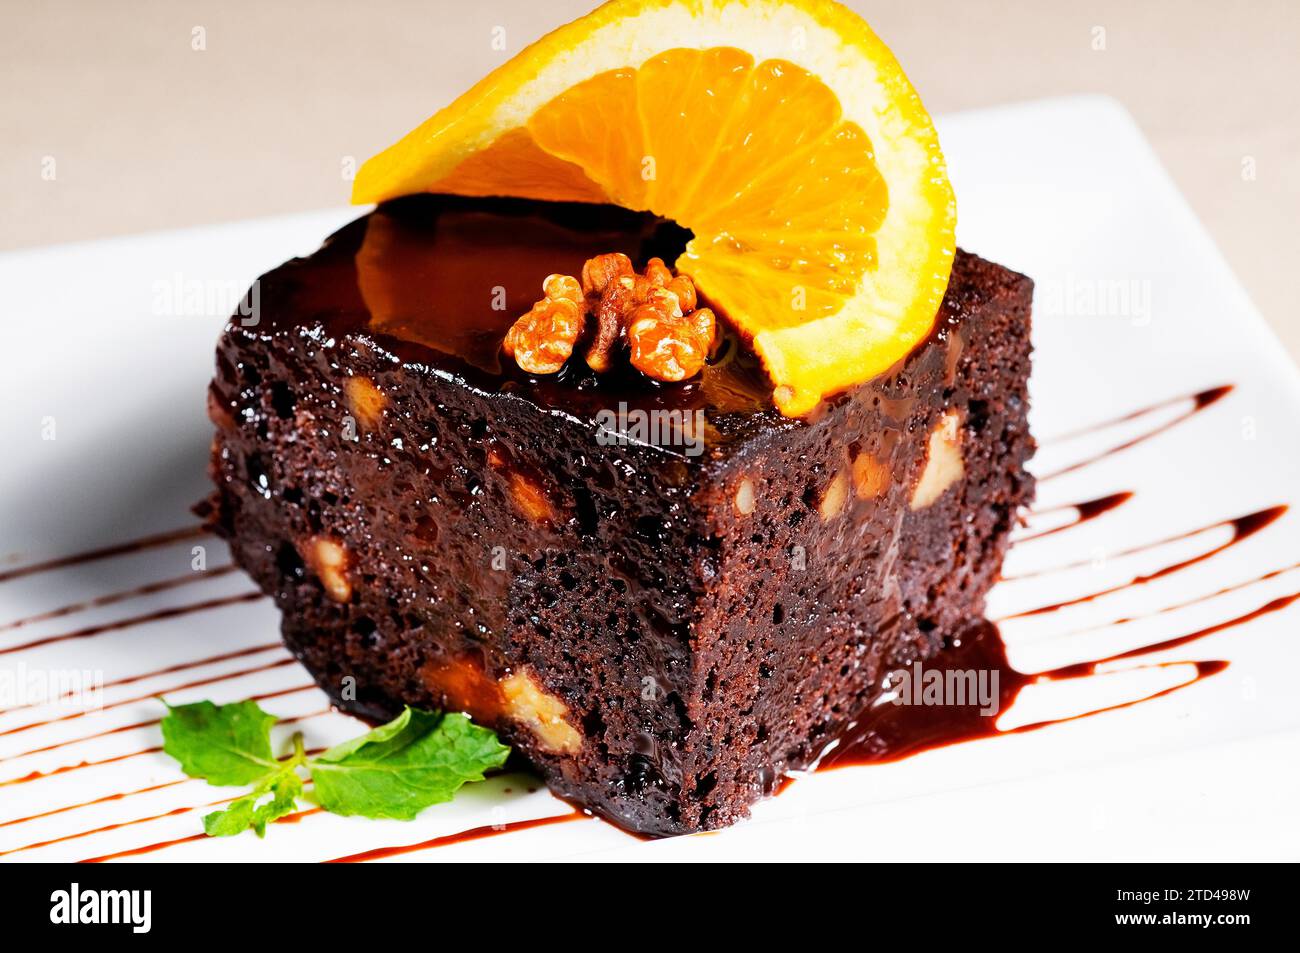 Fresh baked delicious chocolate and walnuts cake with slice of orance on top and mint leaf, food photography Stock Photo